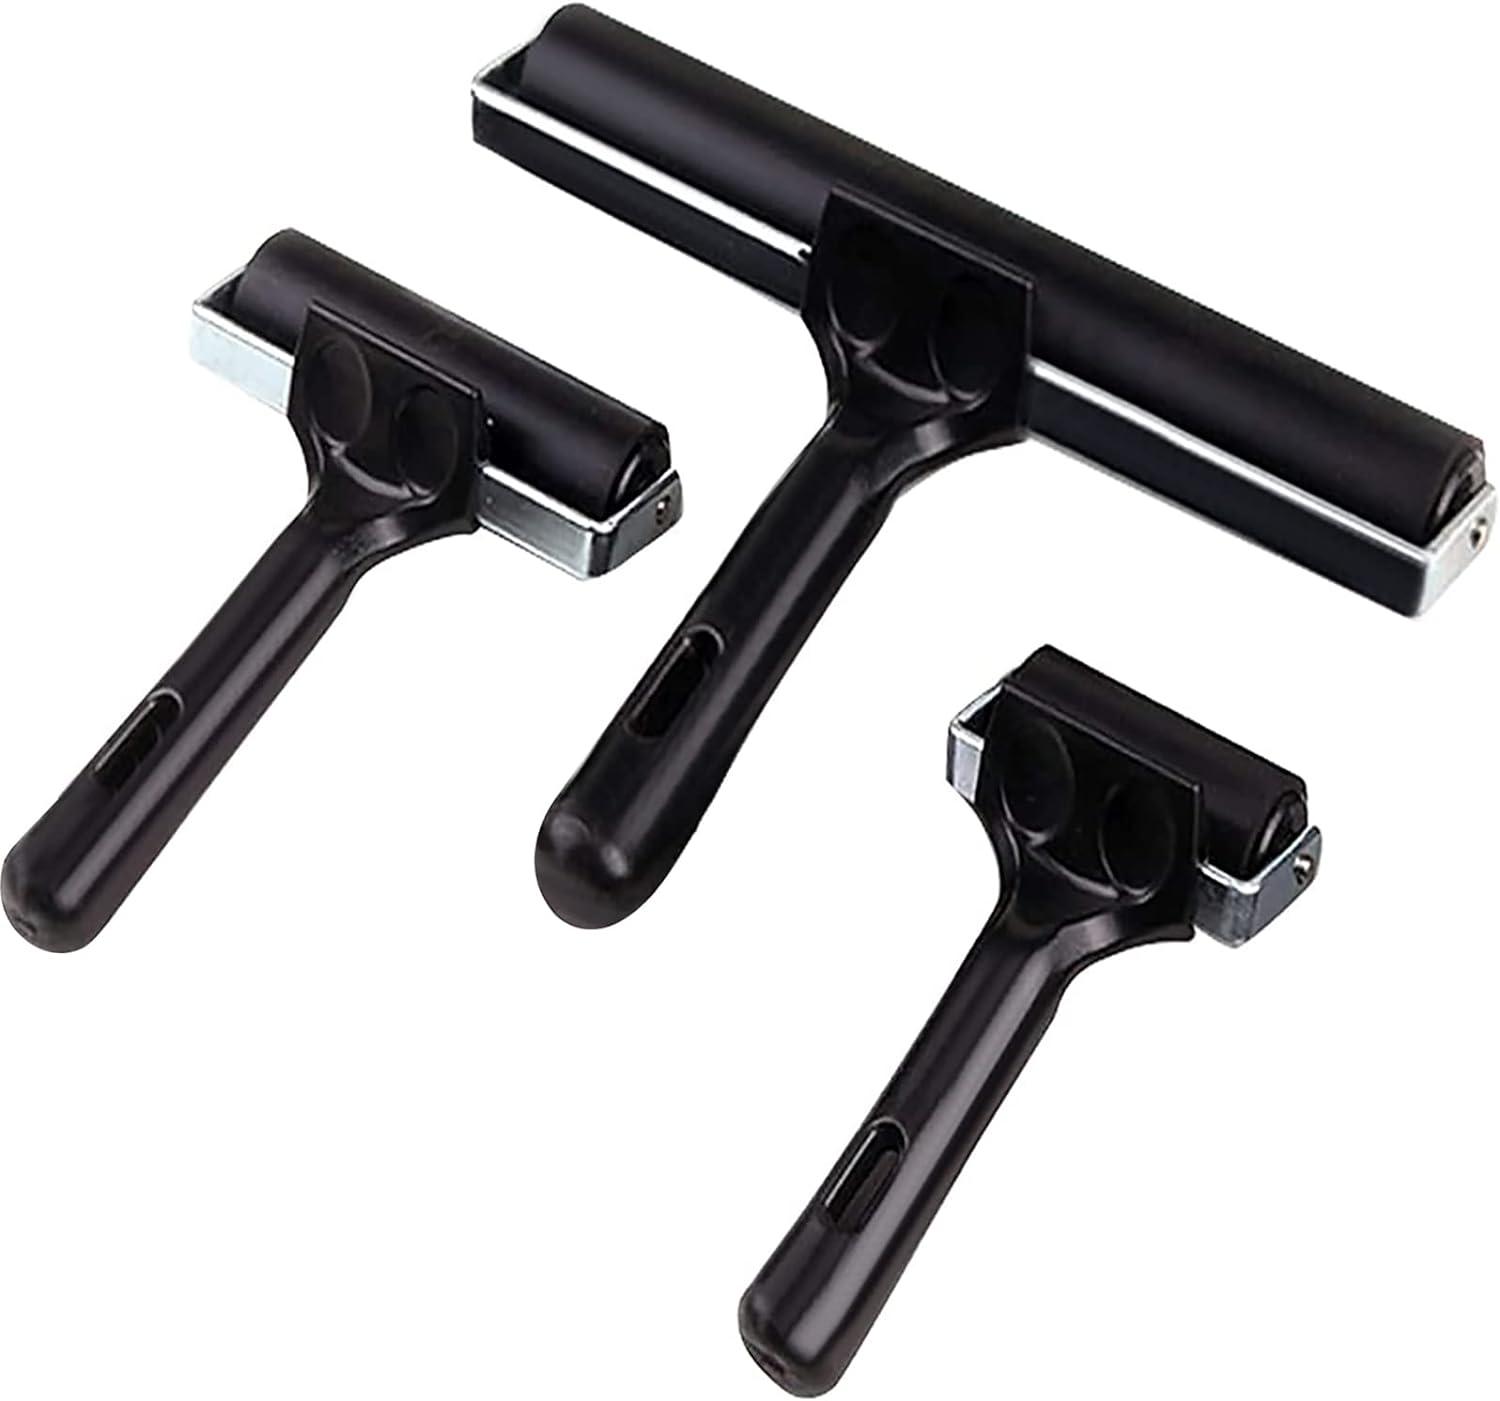 3 Pack Brayer Rollers for Crafting Vinyl Rubber Roller Brayers Printmaking Brayer  Rollers for Cricut Maker Gluing Printing Inking and Stamping(Black) Balck